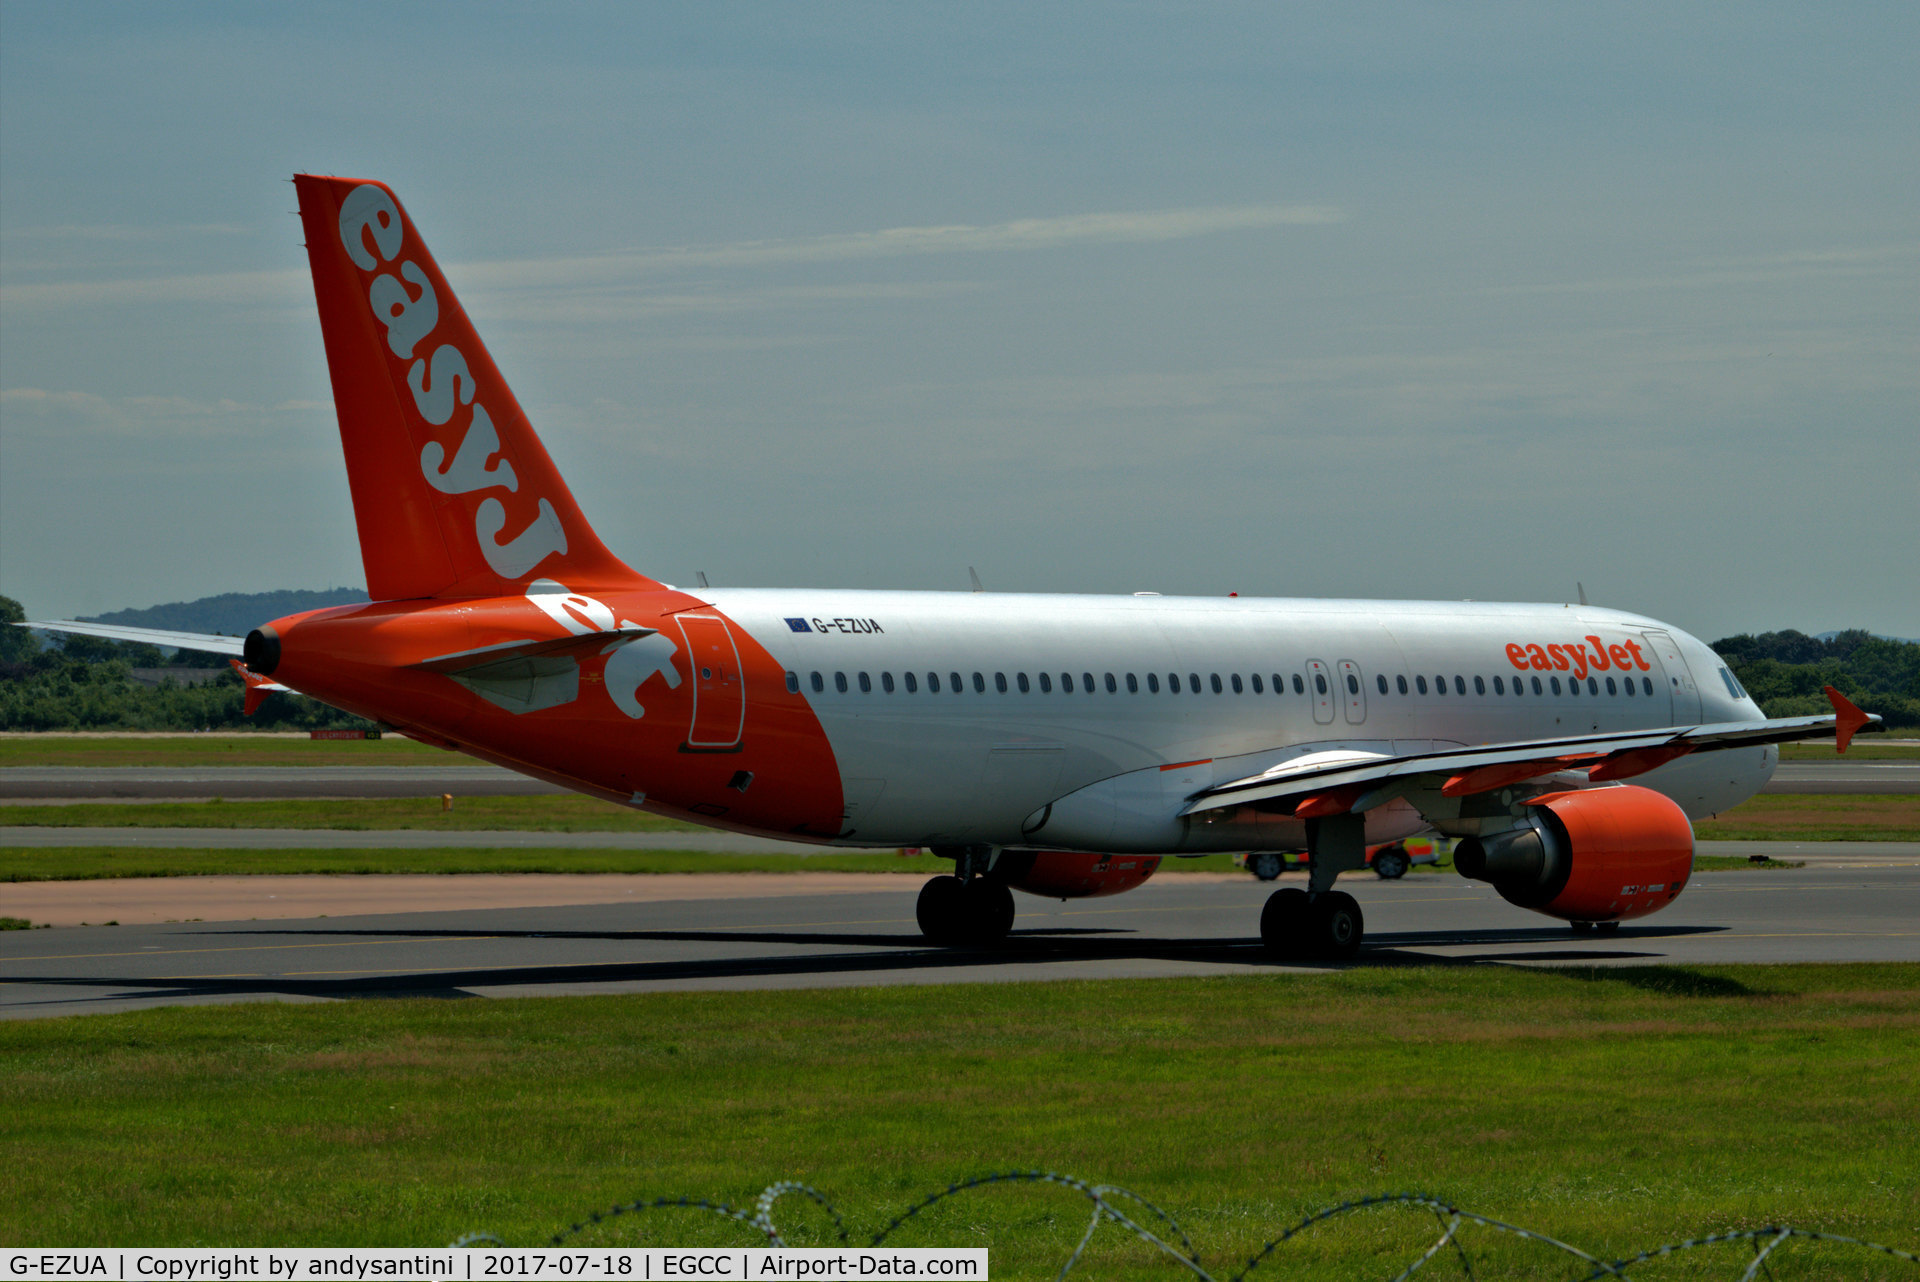 G-EZUA, 2011 Airbus A320-214 C/N 4588, taxing out for take off @ EGCC